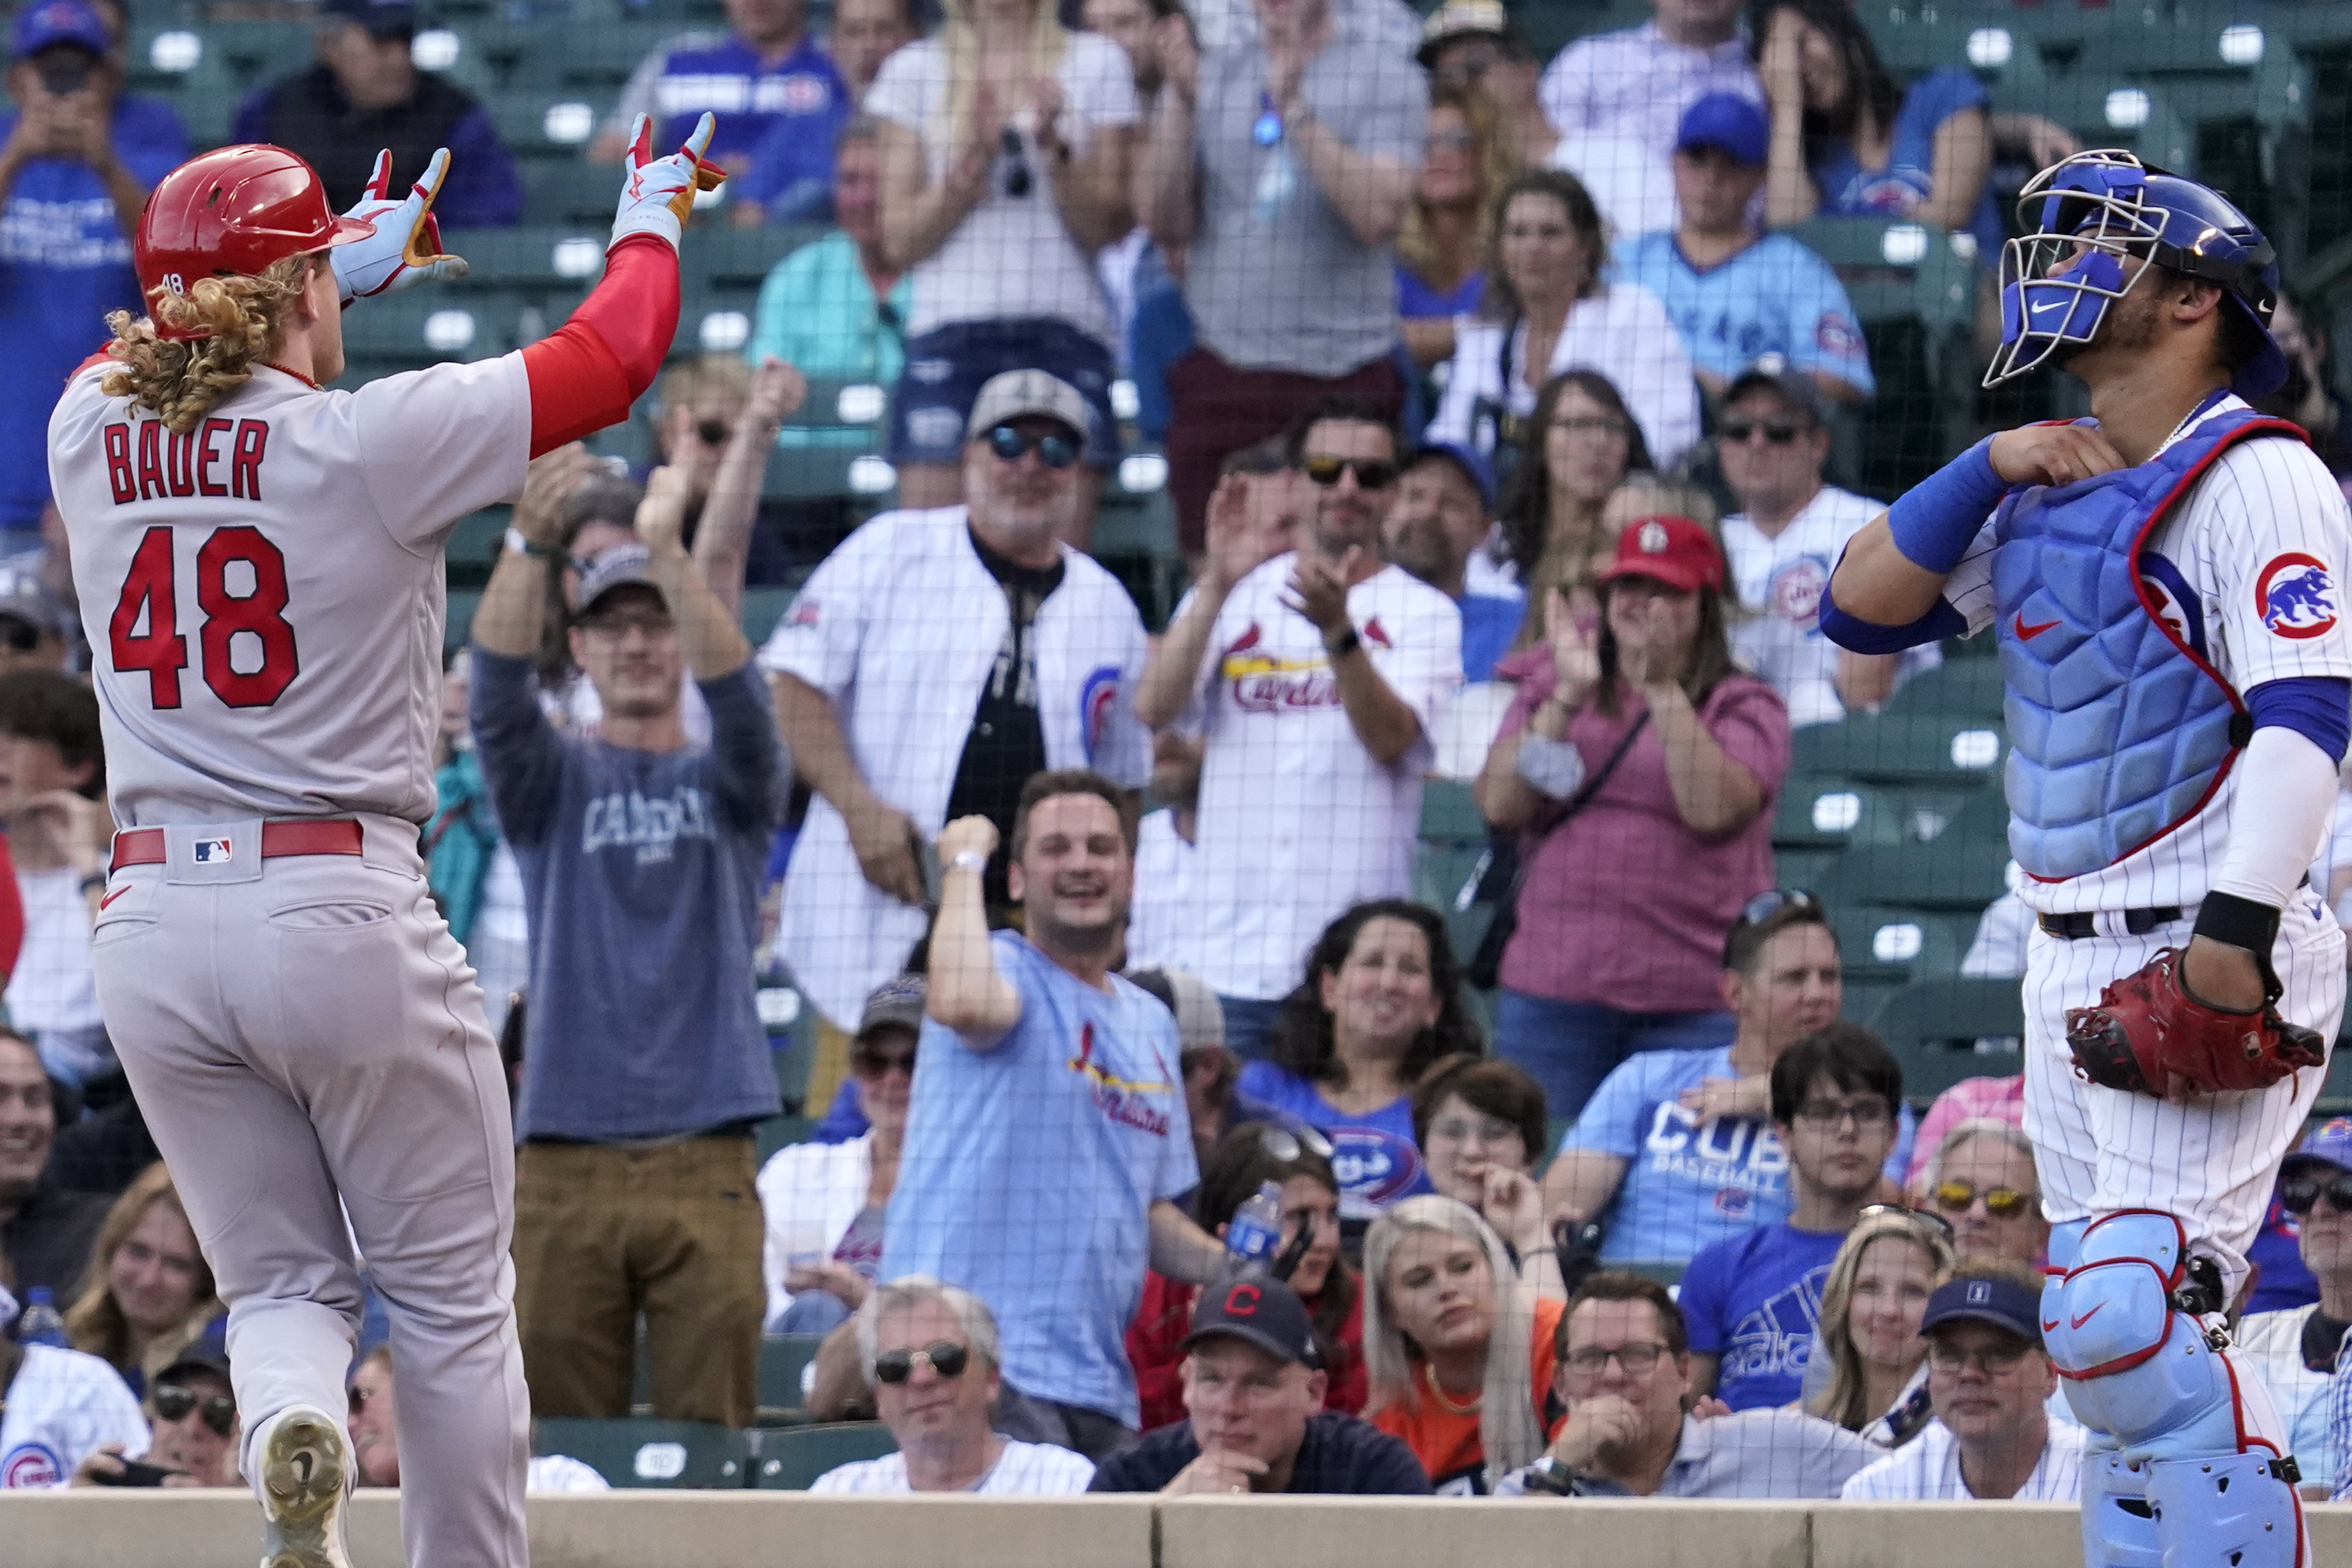 Cubs 8, Reds 7: Cincinnati drops third straight, but goes down swinging